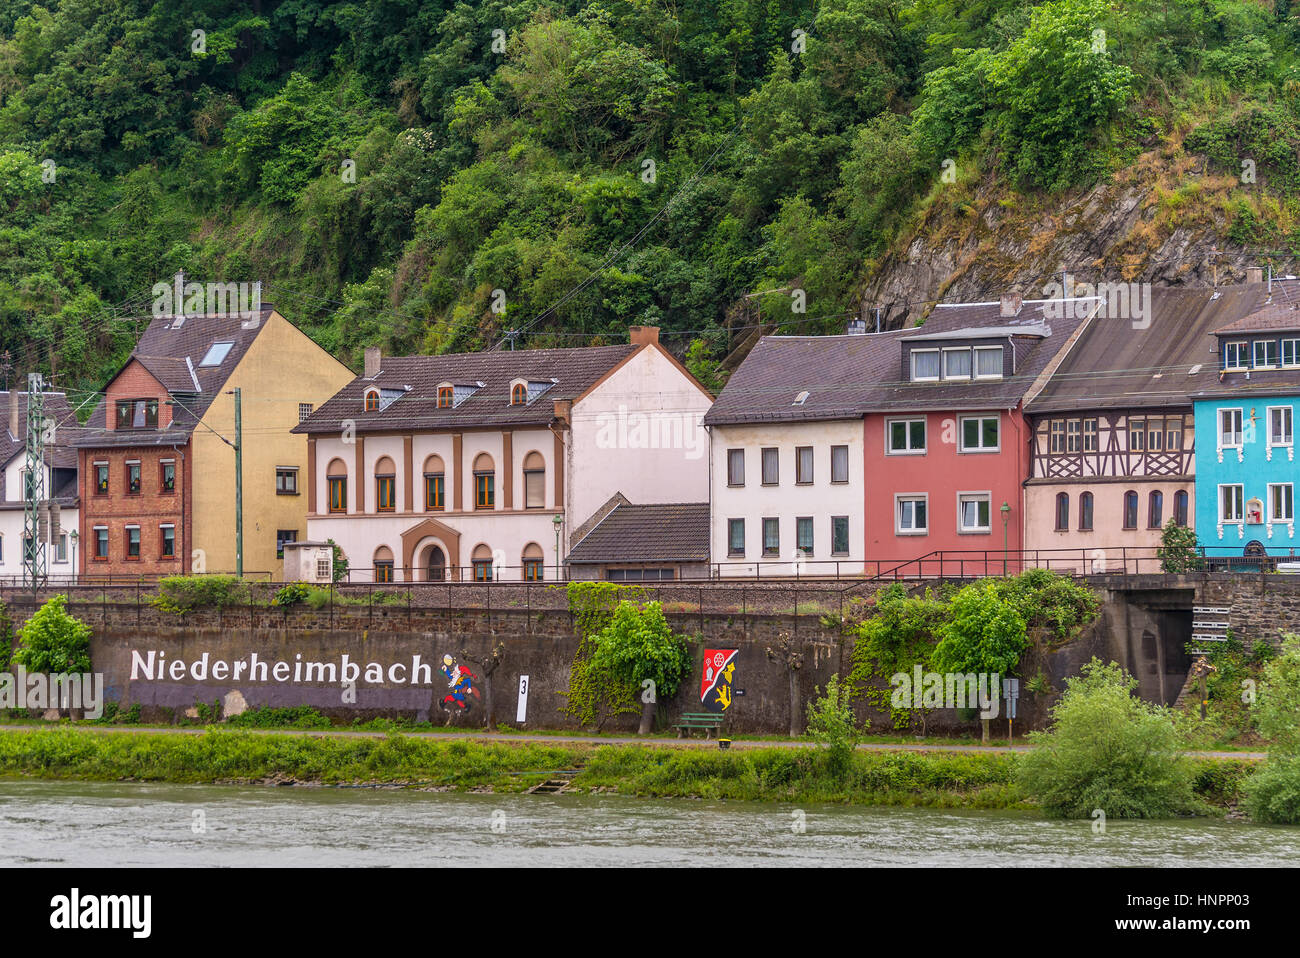 Niederheimbach, Germany - May 23, 2016: Niederheimbach village in the Unesco World Heritage area of the Rhine Valley in cloudy weather. Stock Photo